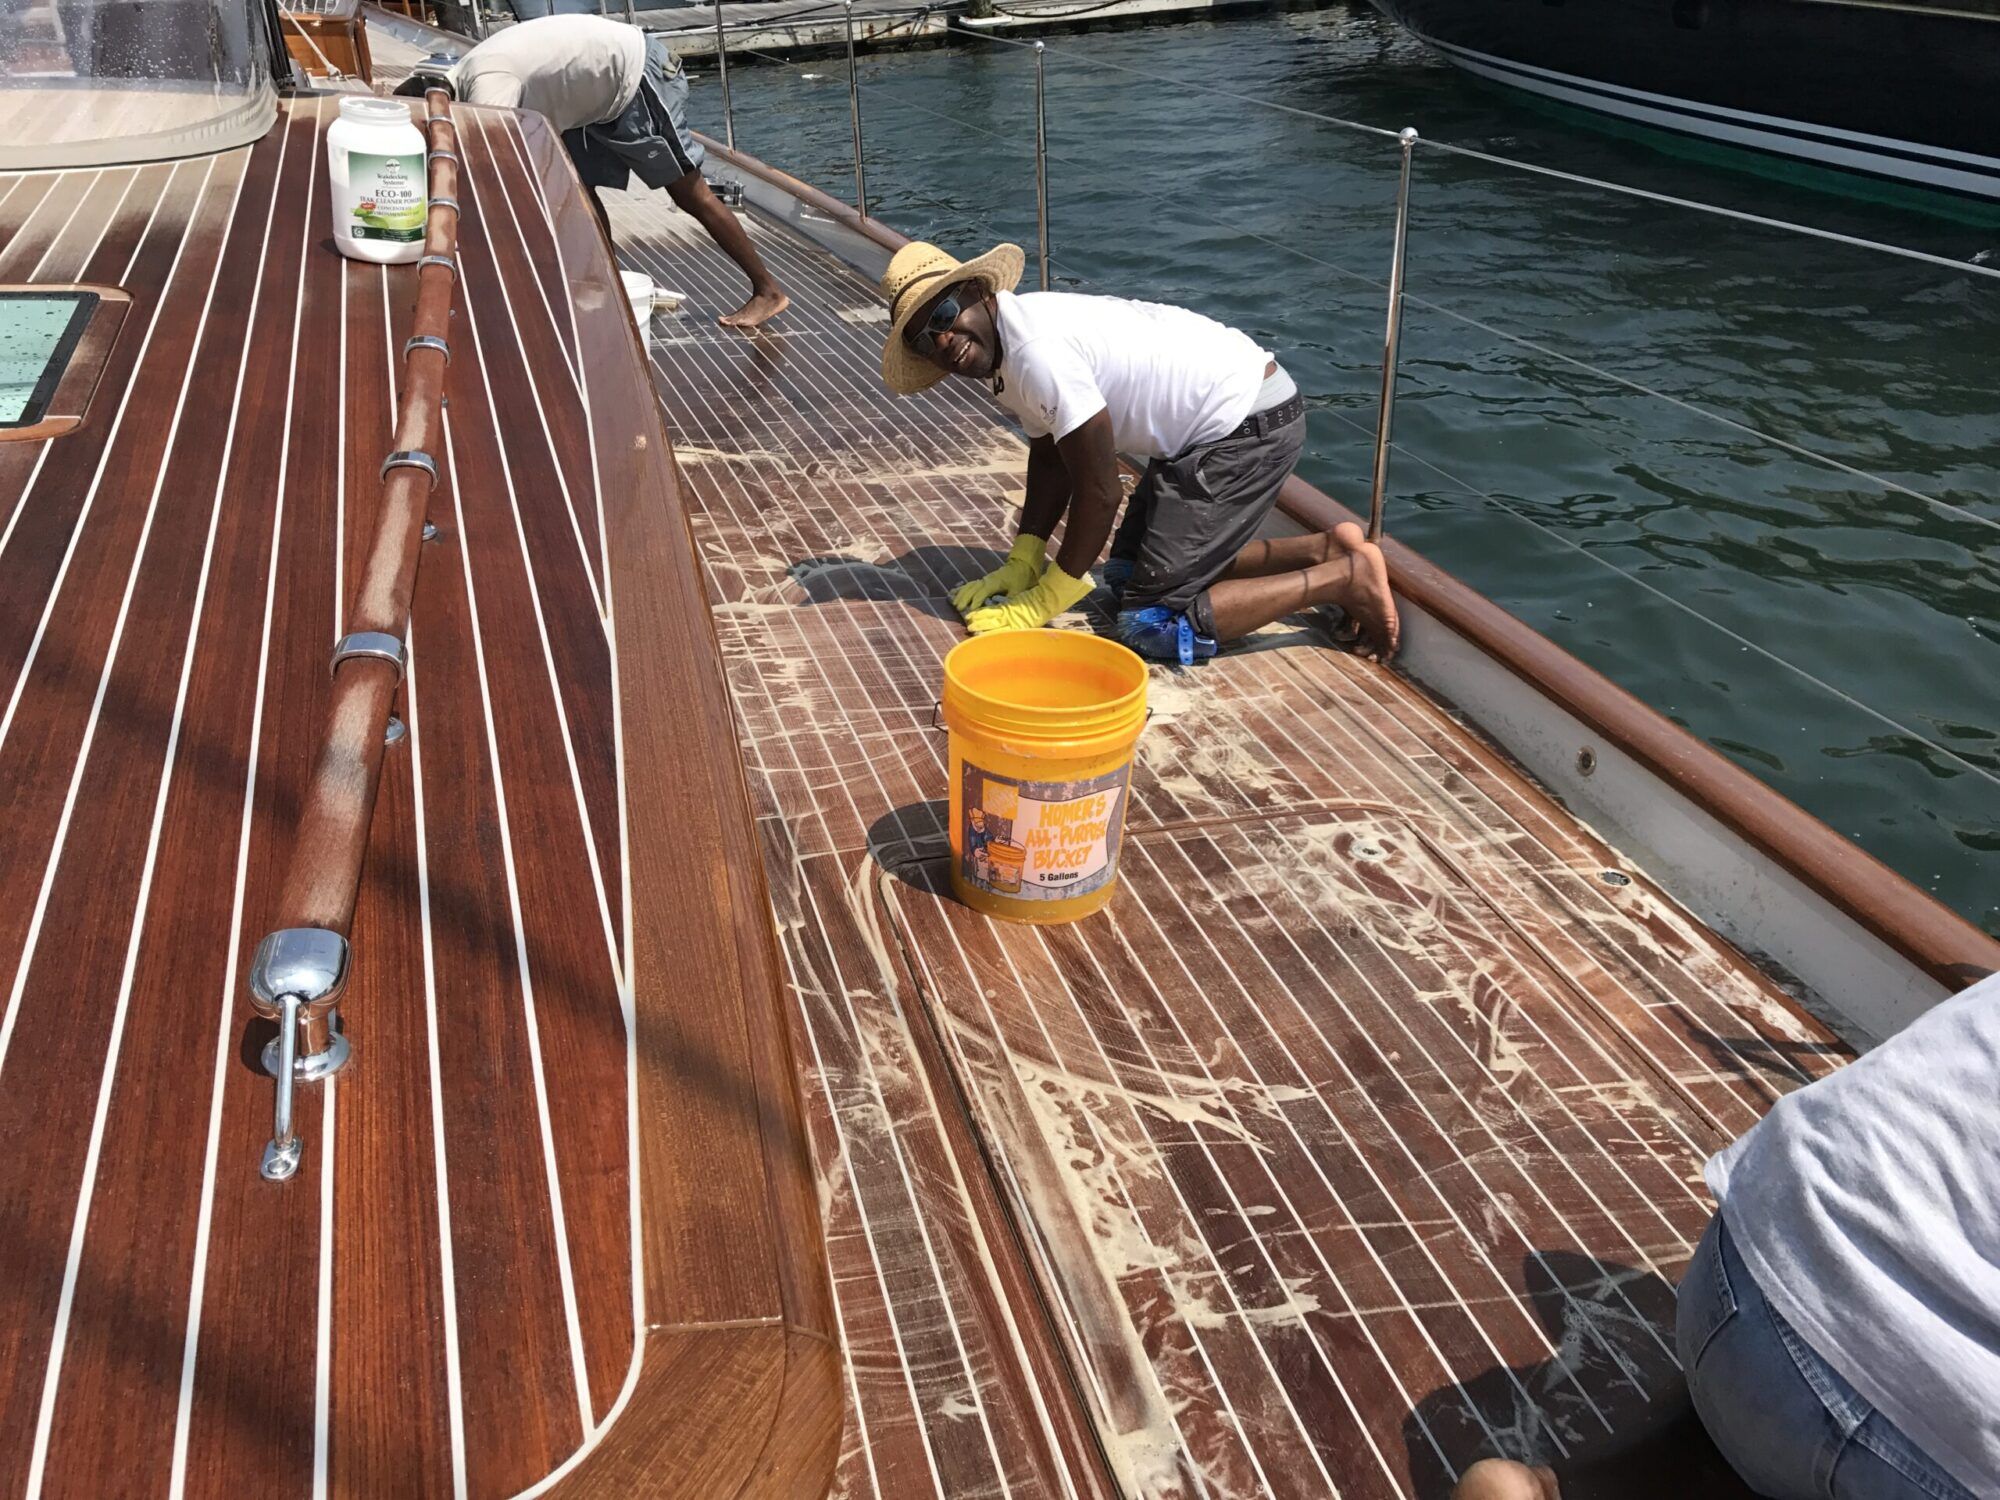 Cleaning teak decking with ECO-100 teak decking cleaner